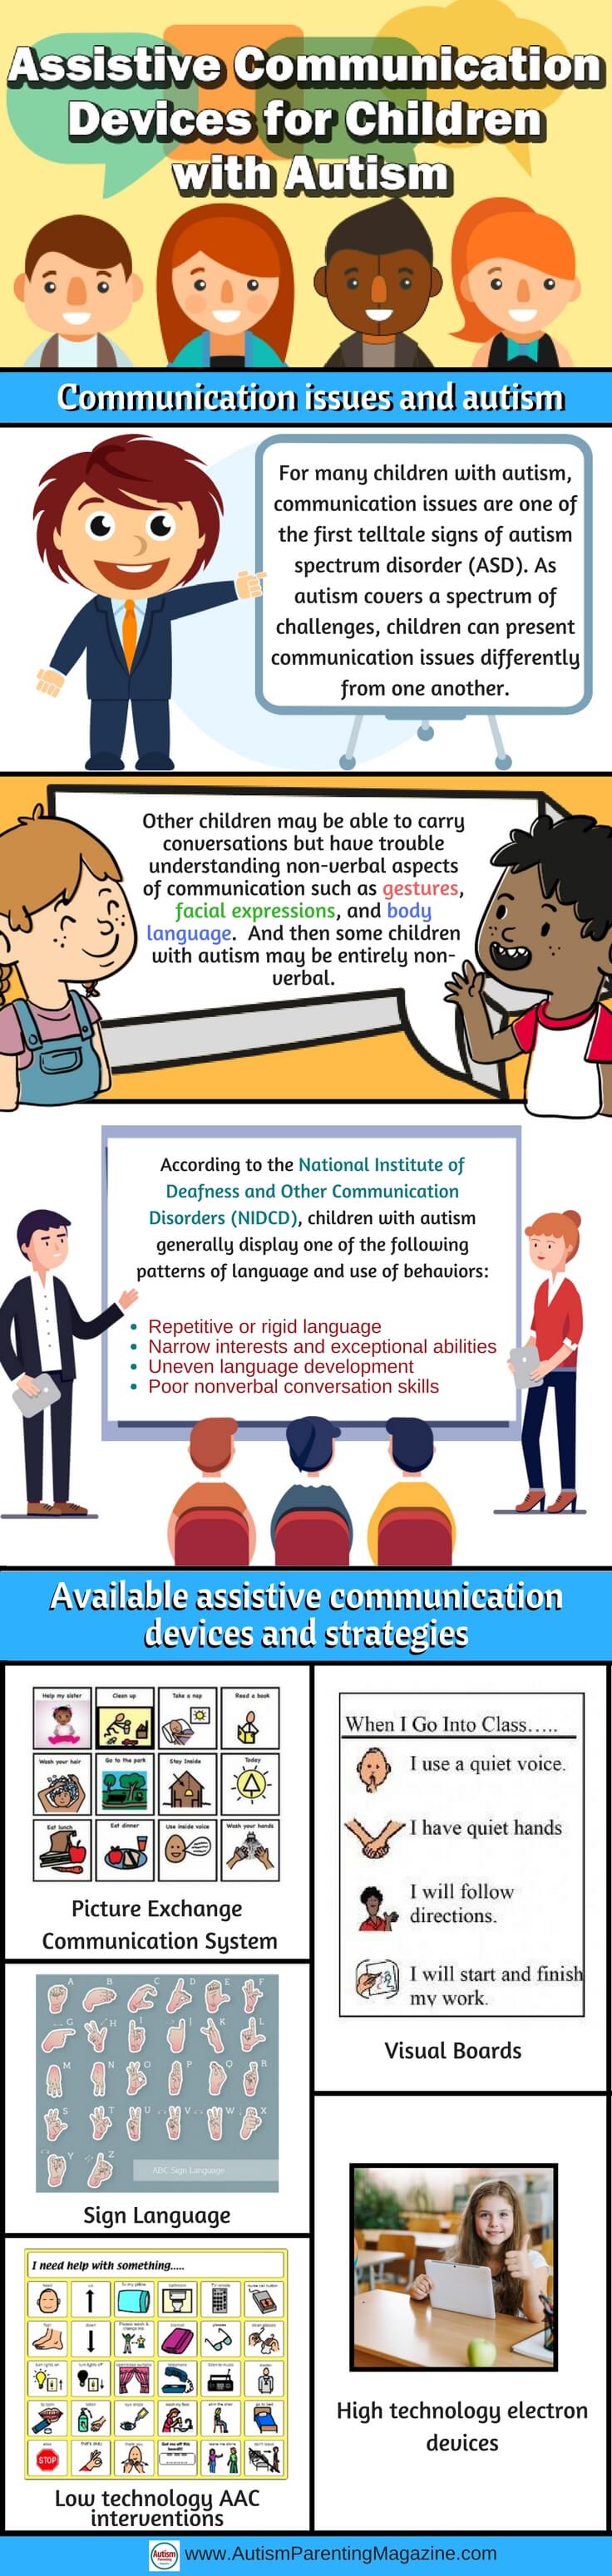 Assistive-Communication-Devices-for-Children-with-Autism-infographic-plaza